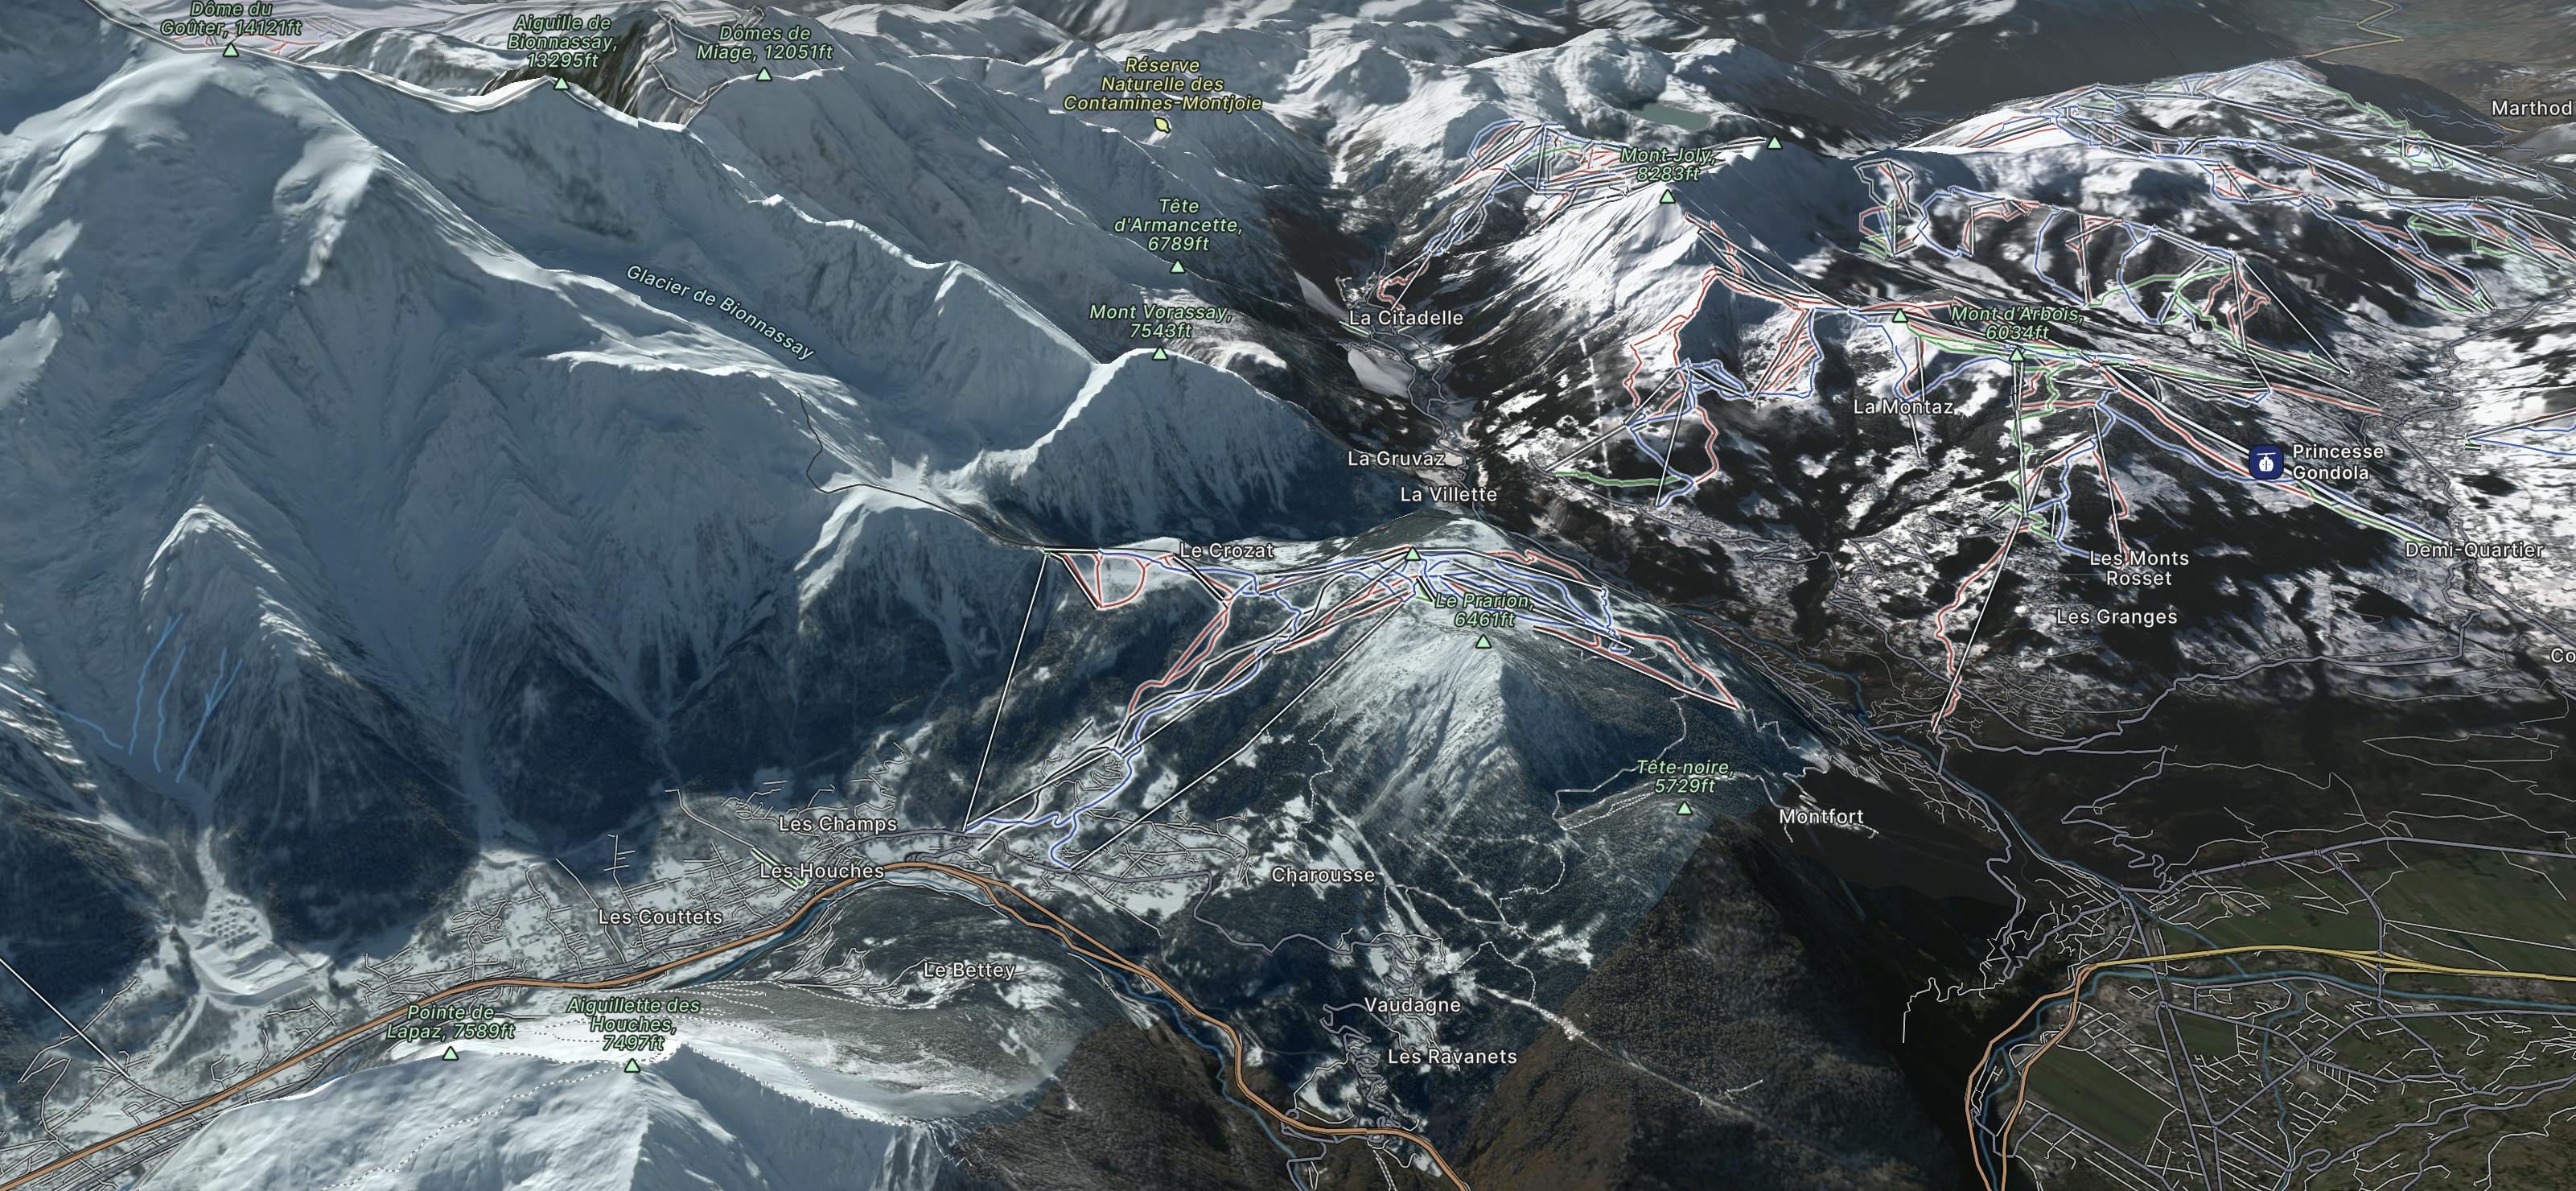 Les Houches Map